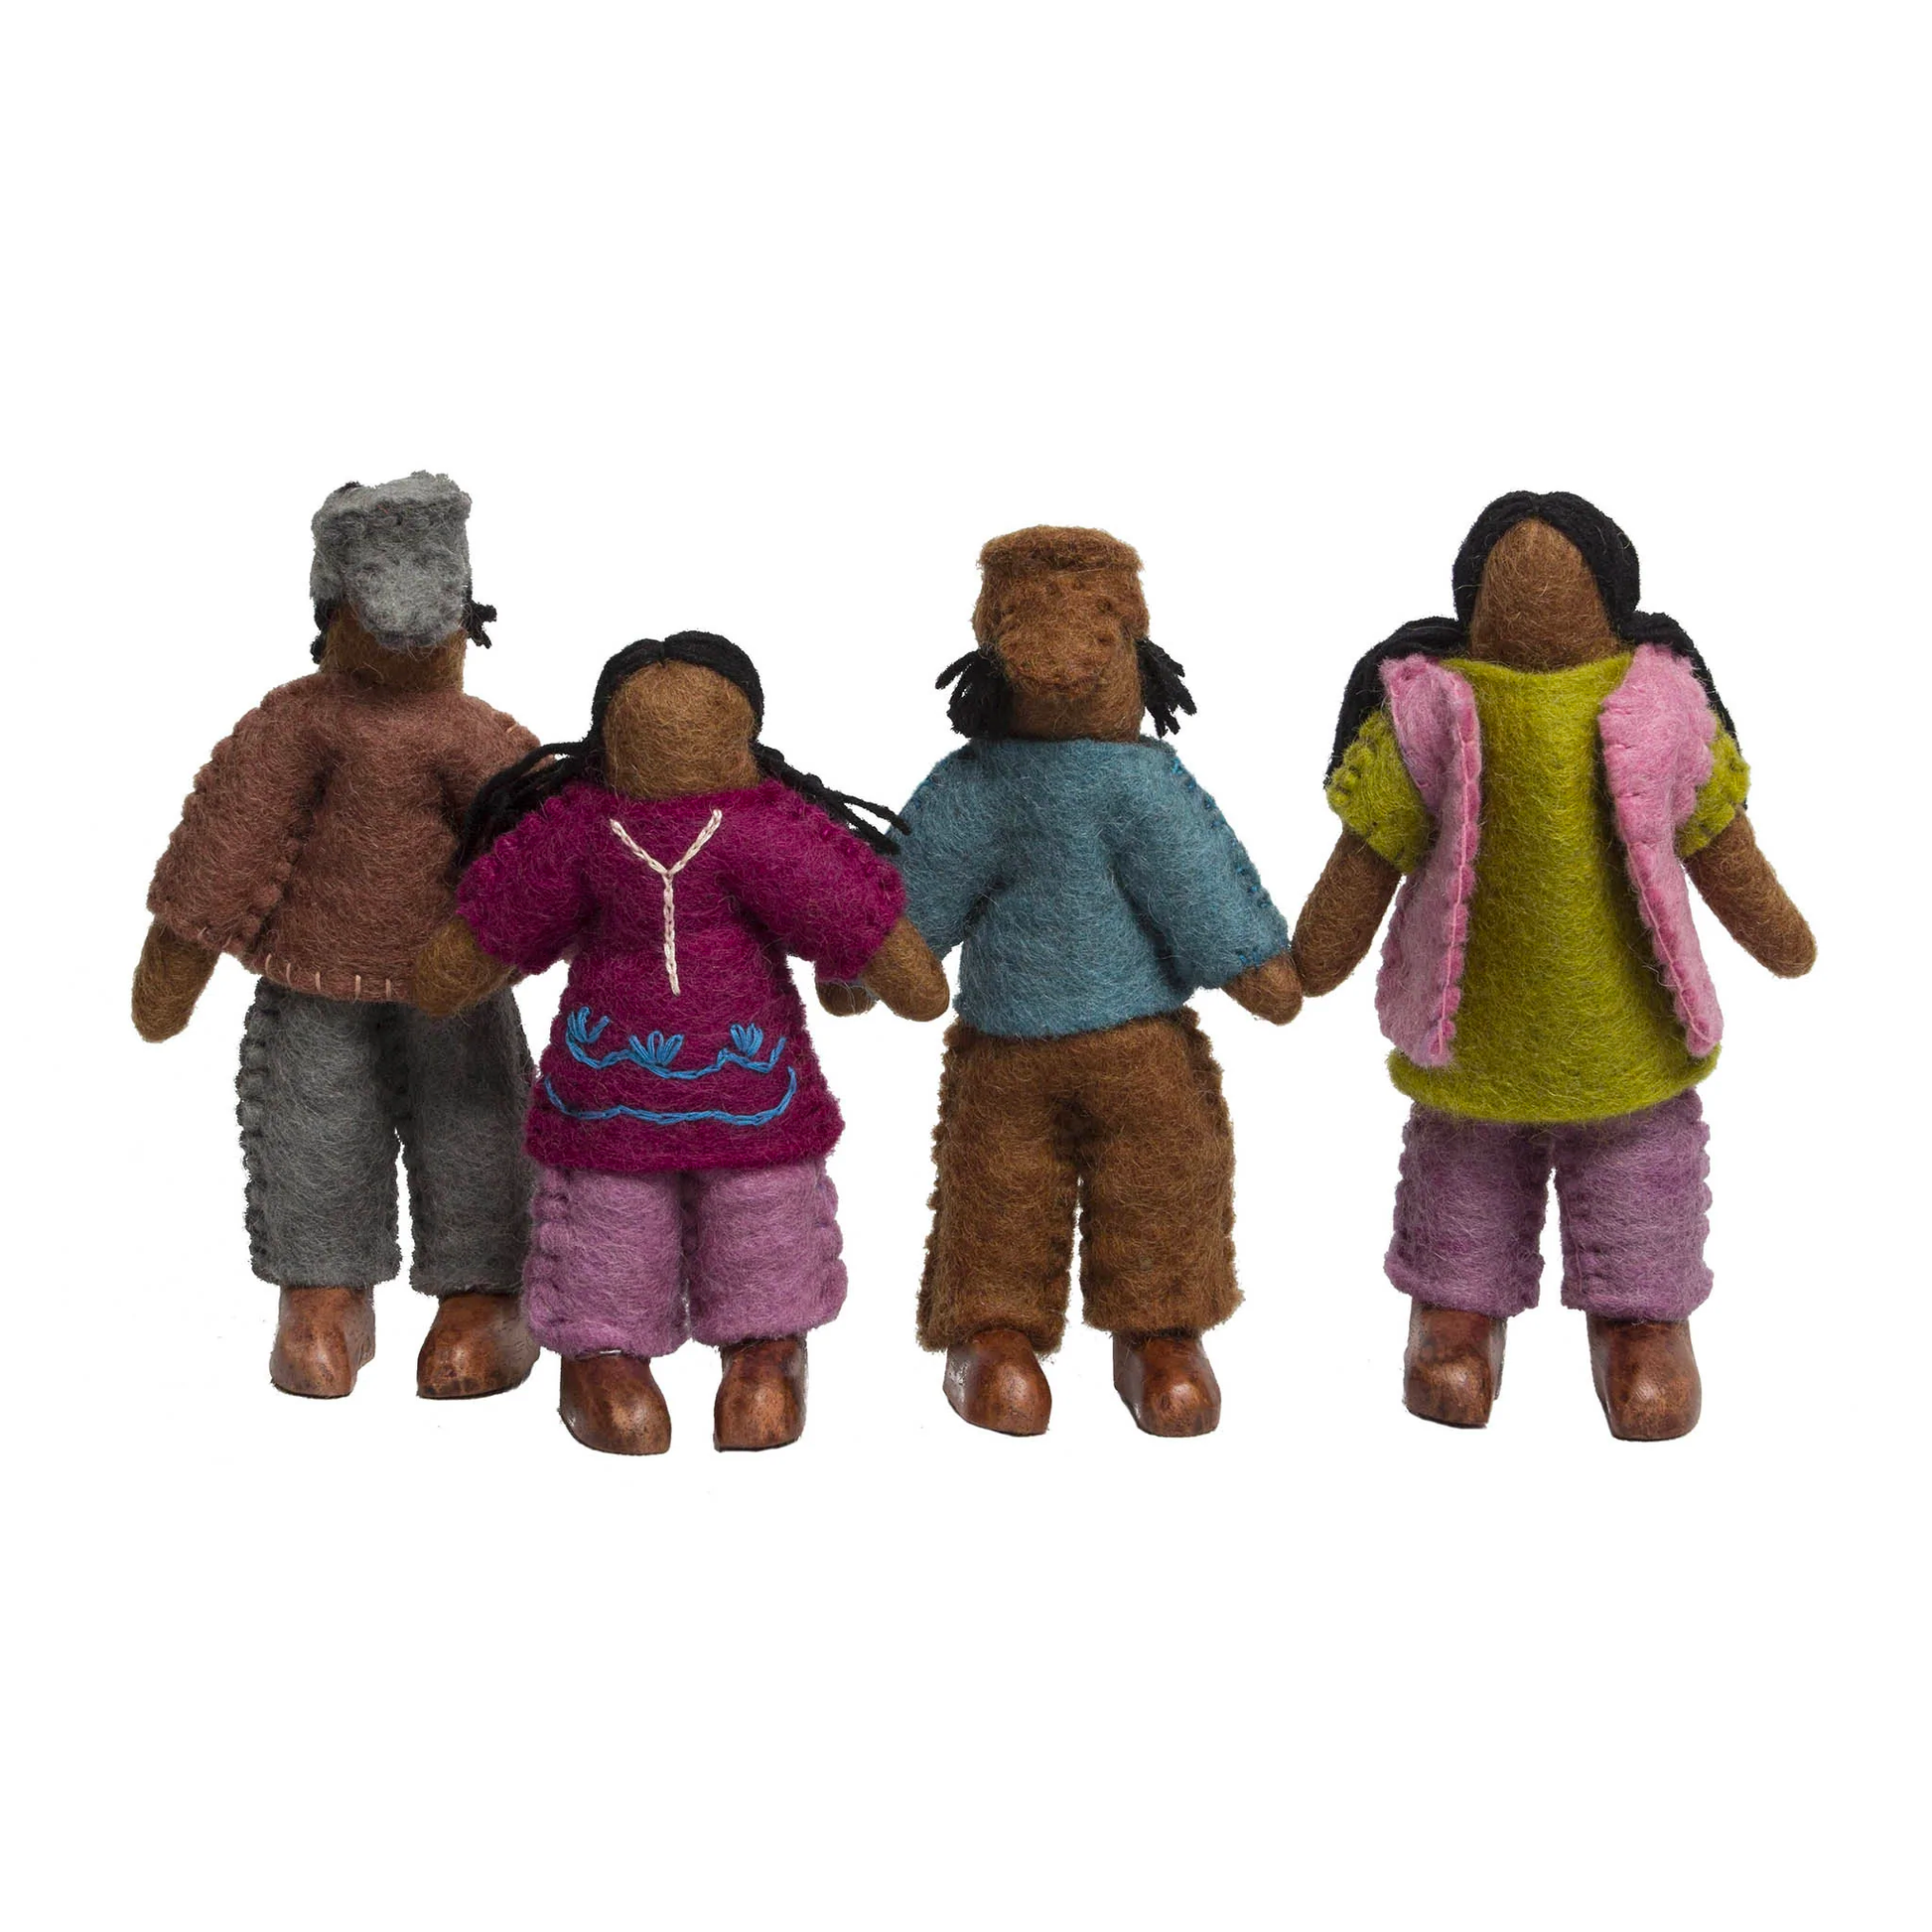 A Family of Wool Felt Dolls with a brown skin tone